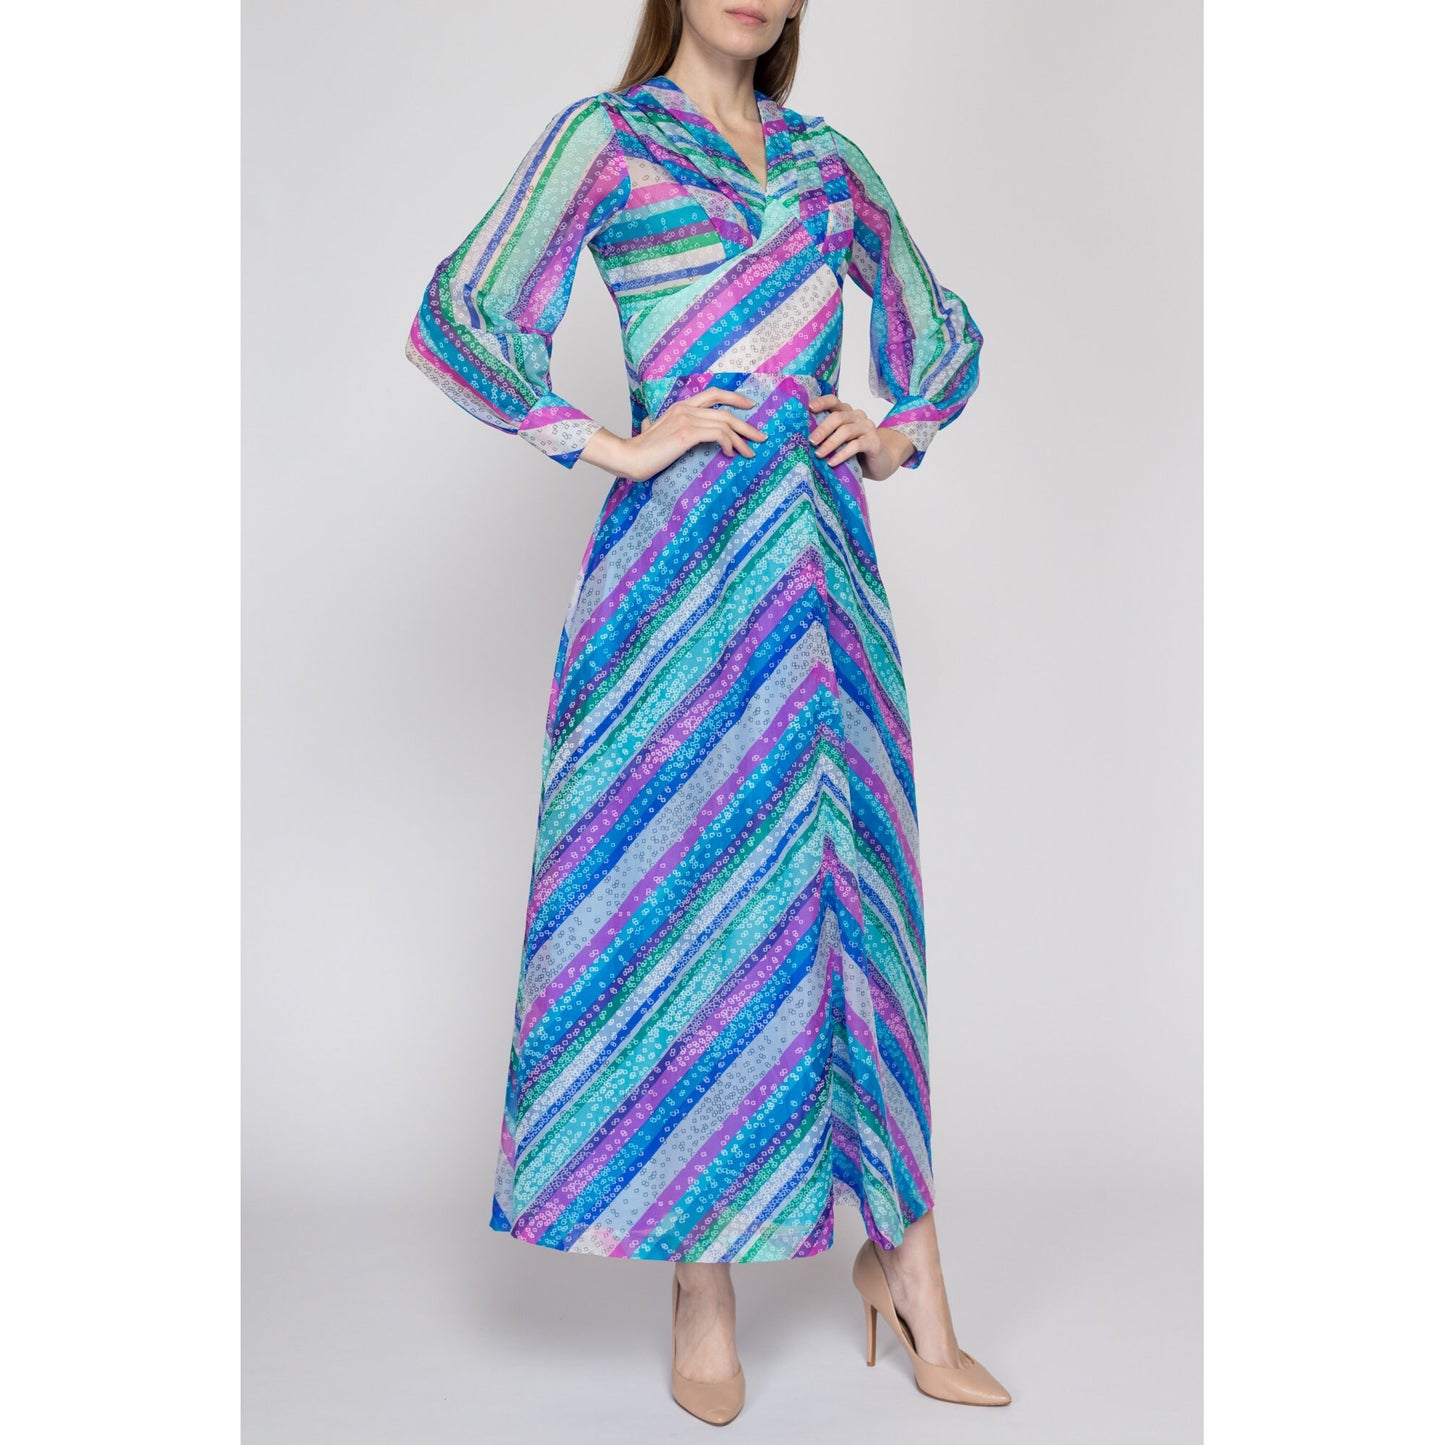 Small 60s 70s Psychedelic Striped Maxi Dress Petite | Vintage Sheer Sleeve A Line Hippie Gown